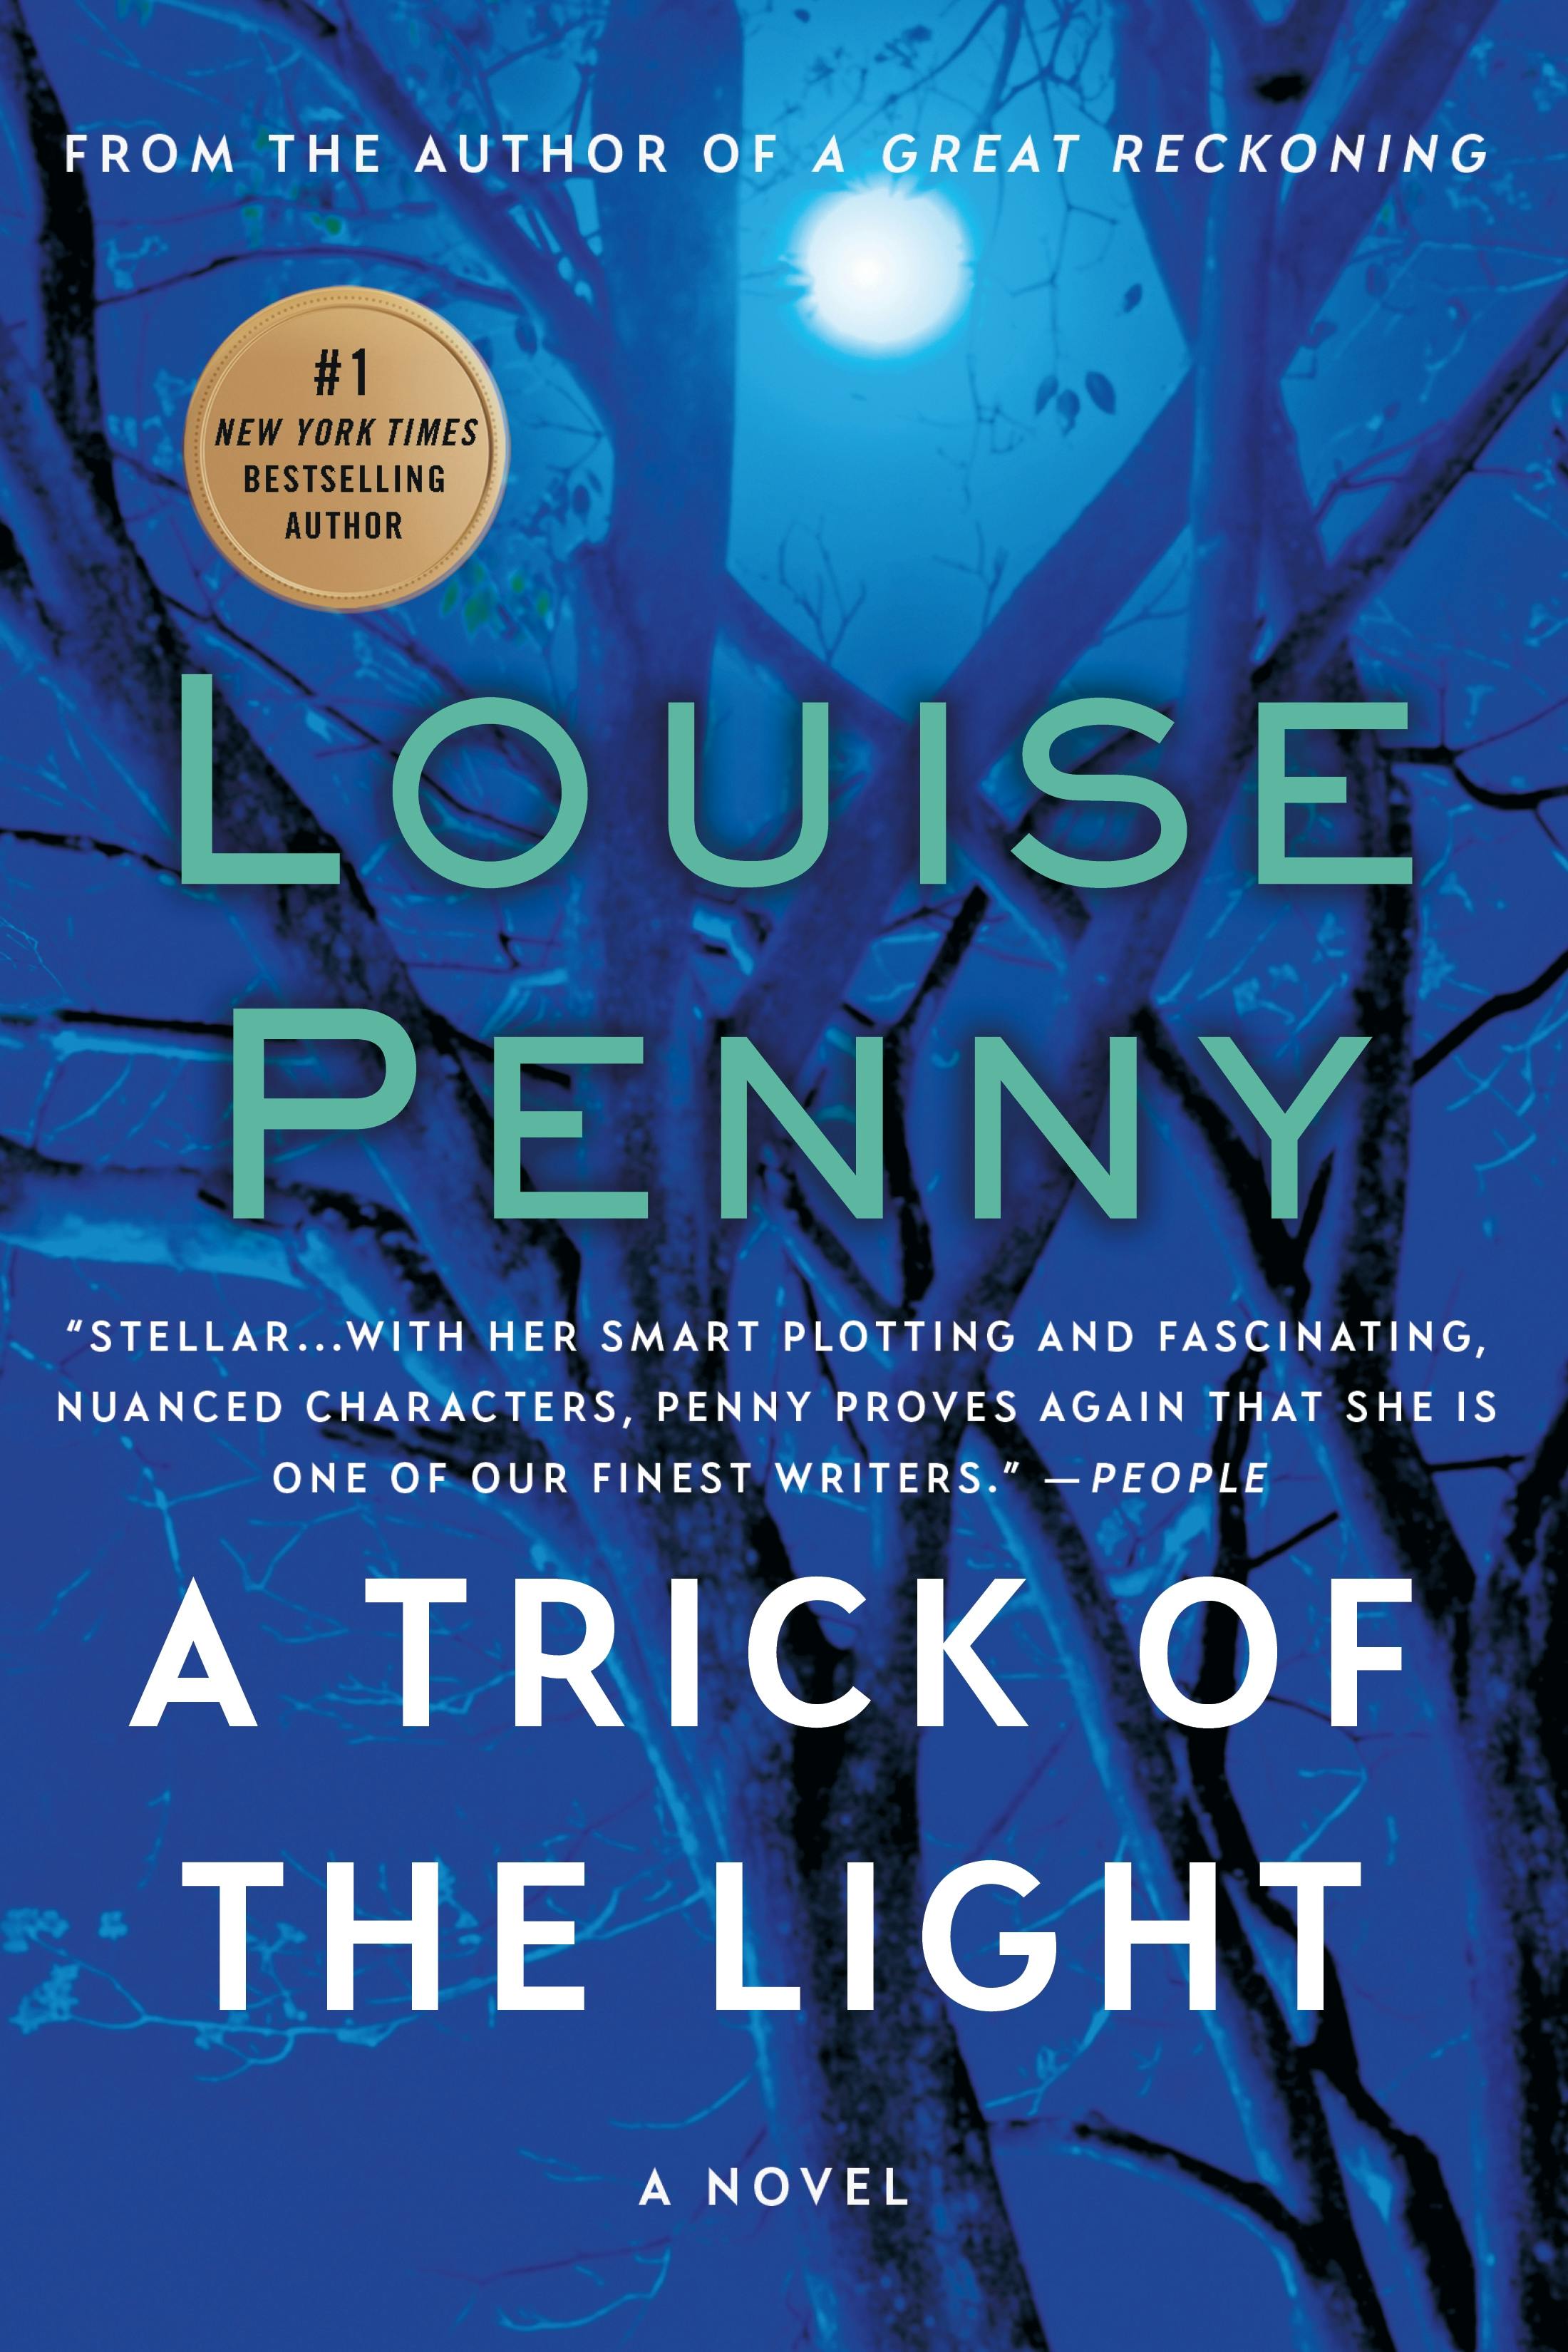 The Cruelest Month: A Chief Inspector Gamache Novel by Louise Penny  Paperback 9780312573508